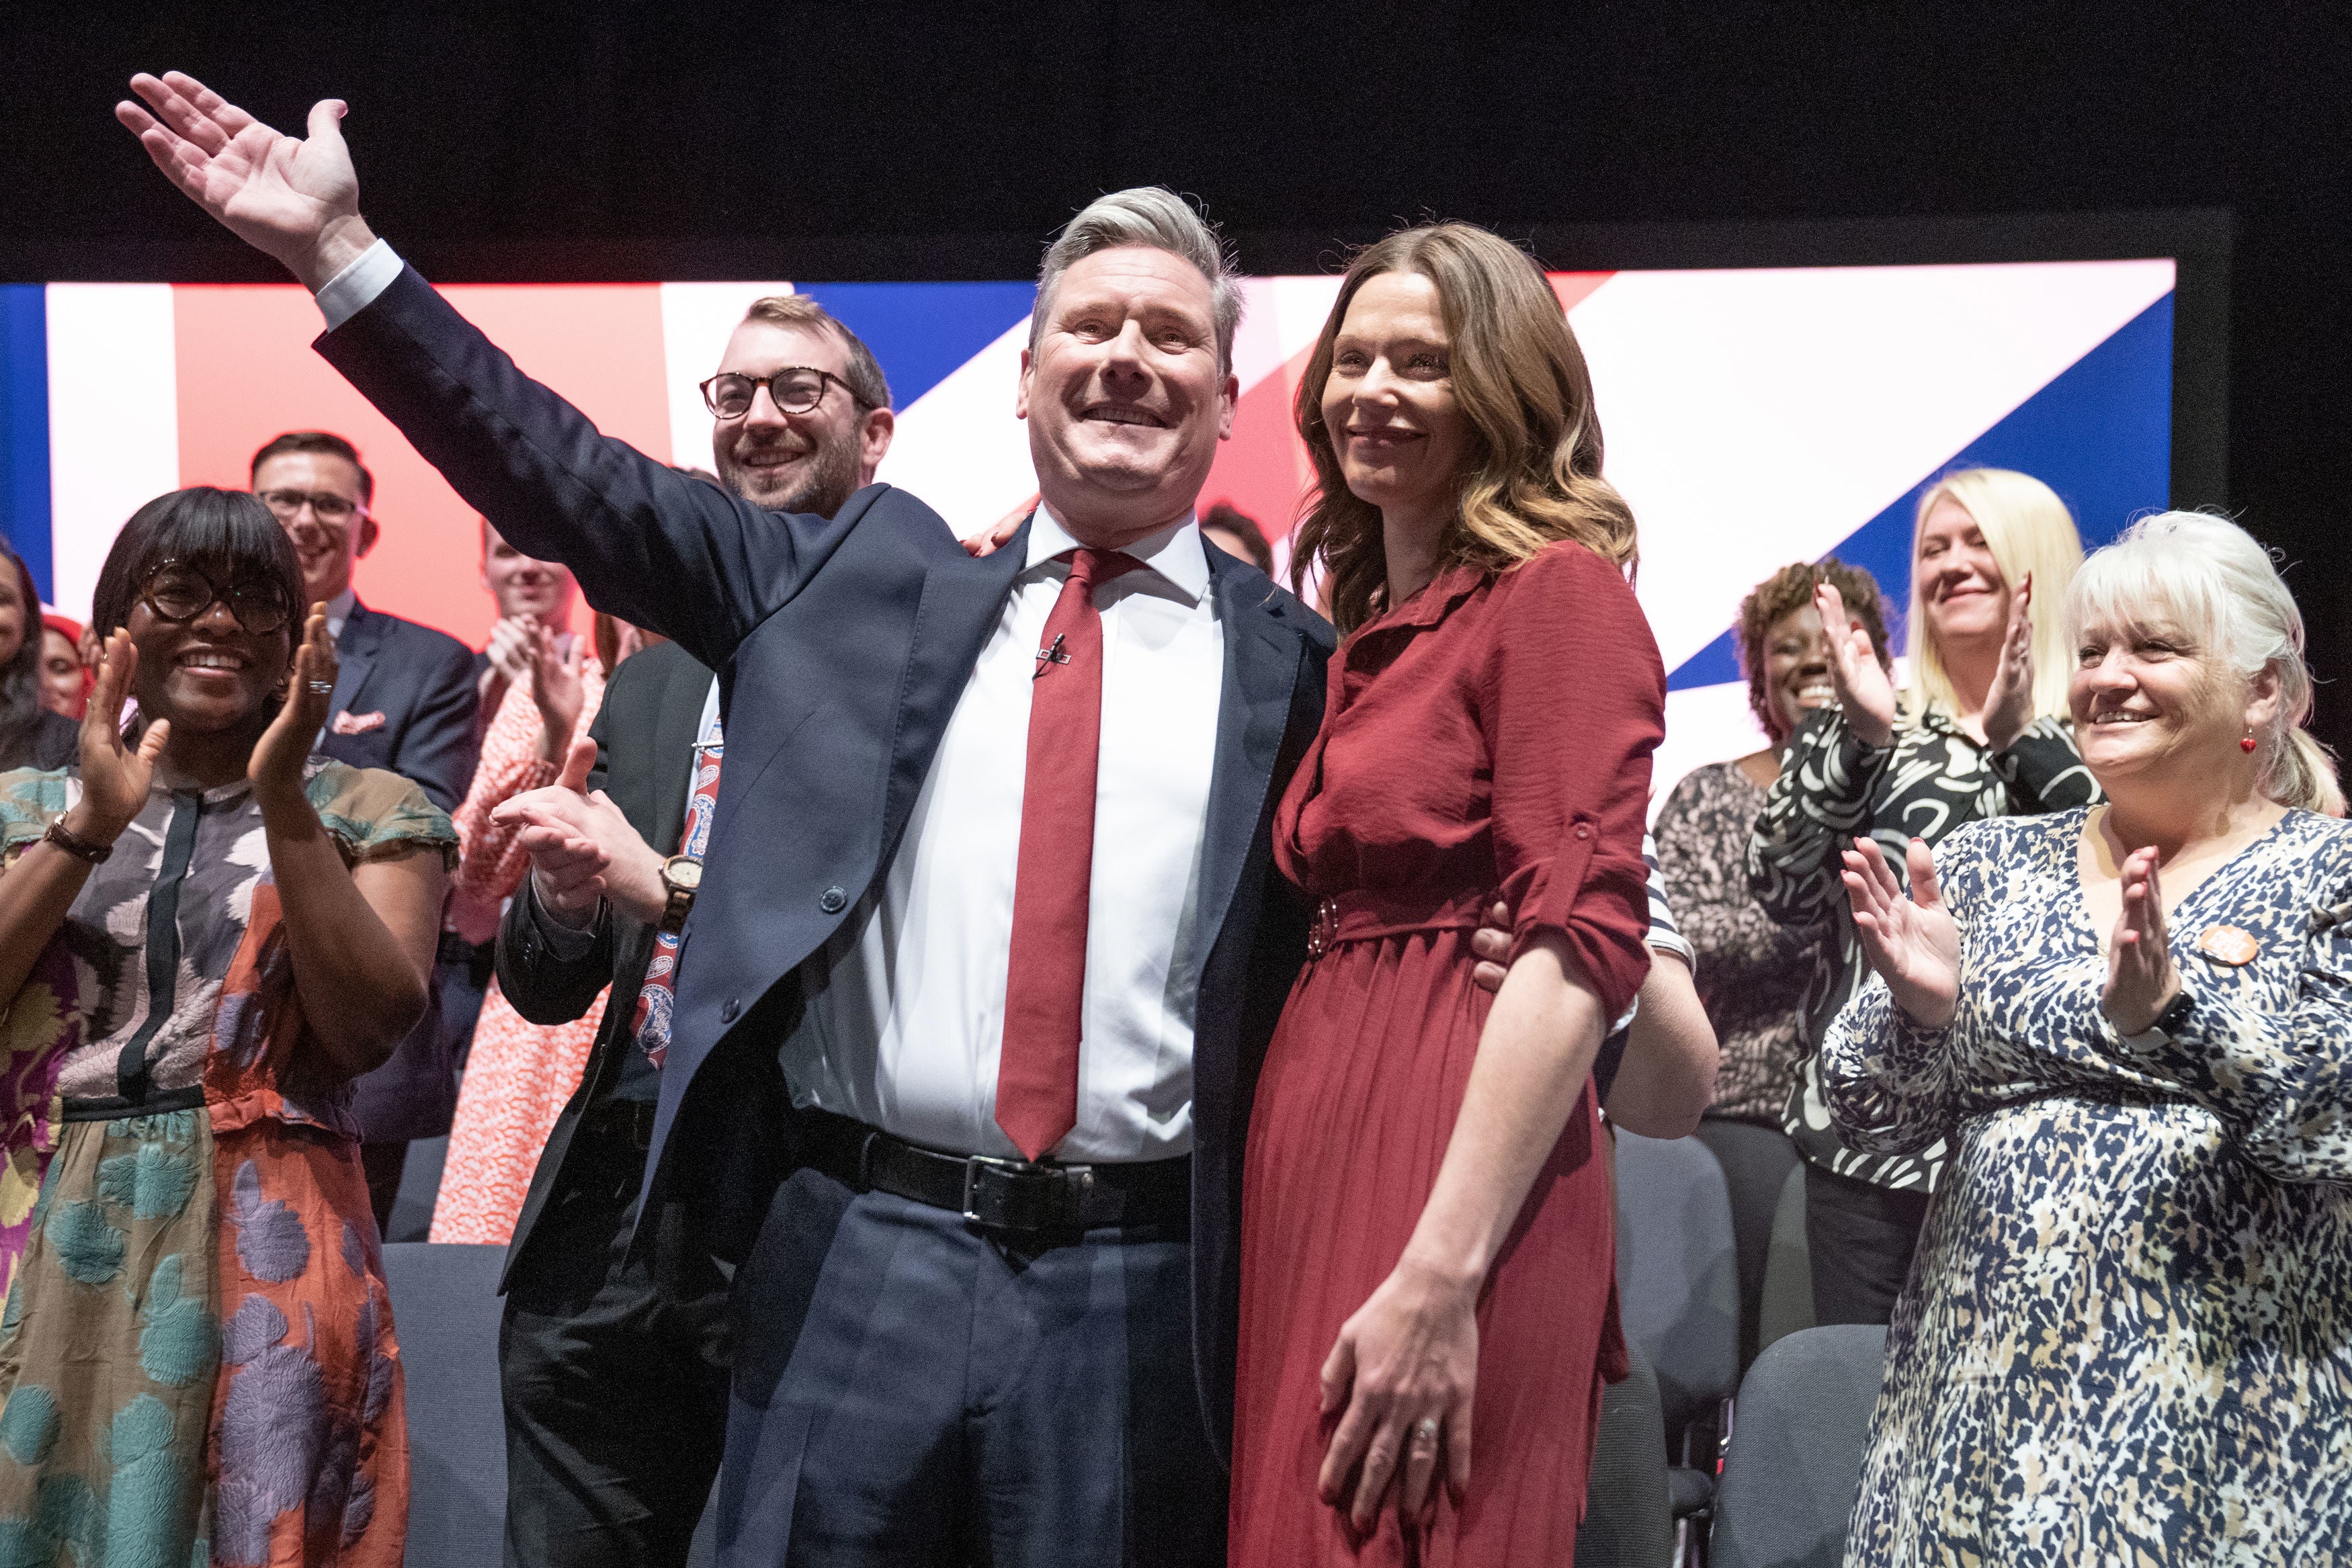 Sir Keir is joined on stage by his wife after delivering his keynote speech to the Labour Party Conference in Liverpool on Tuesday